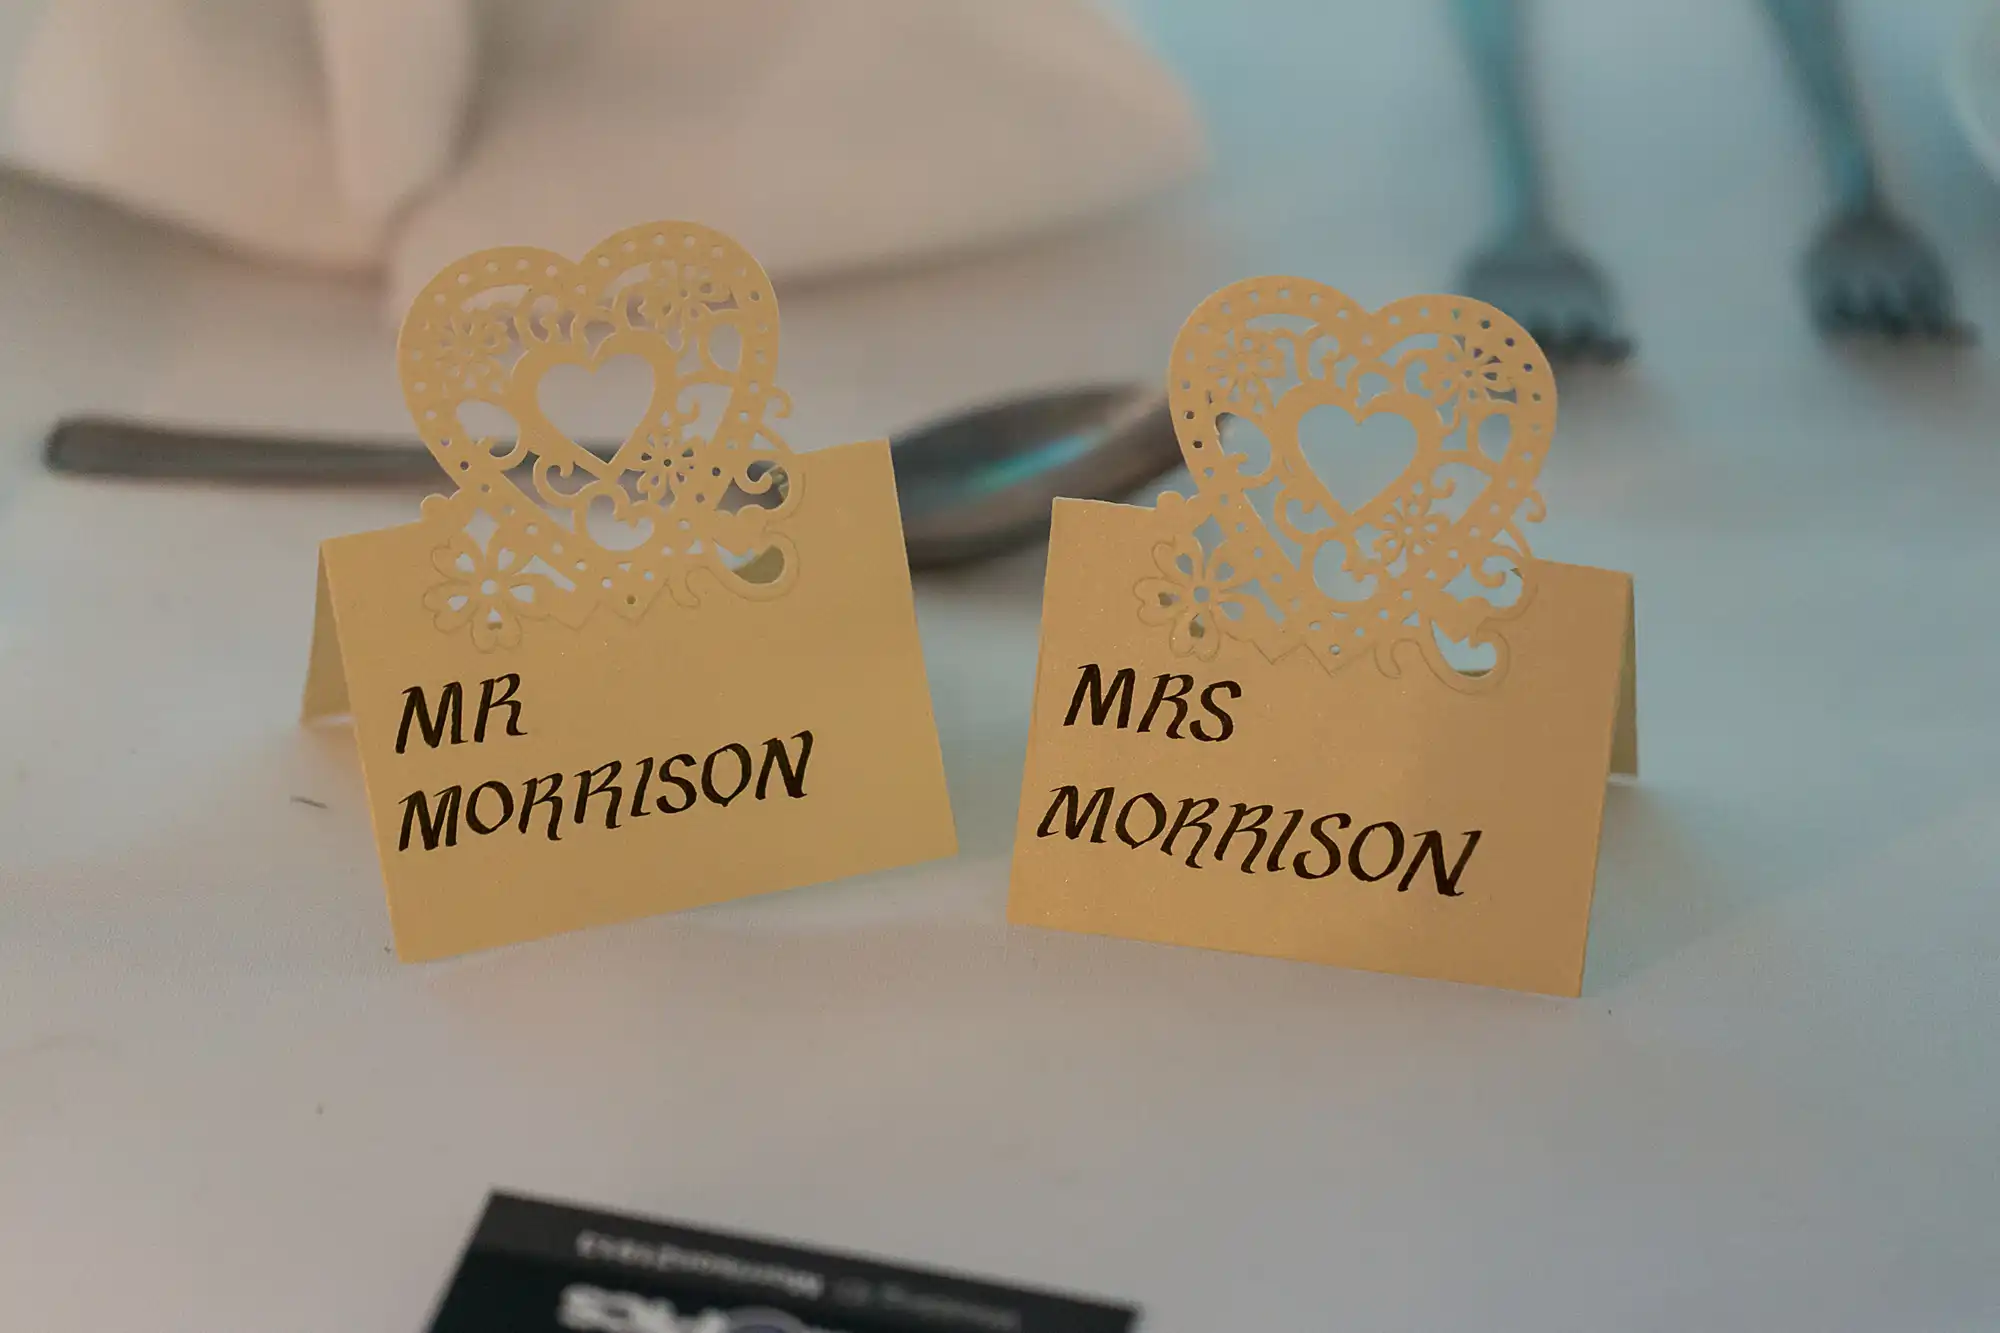 Two ornate wedding place cards reading "mr morrison" and "mrs morrison" on a table, with soft focus on utensils in the background.